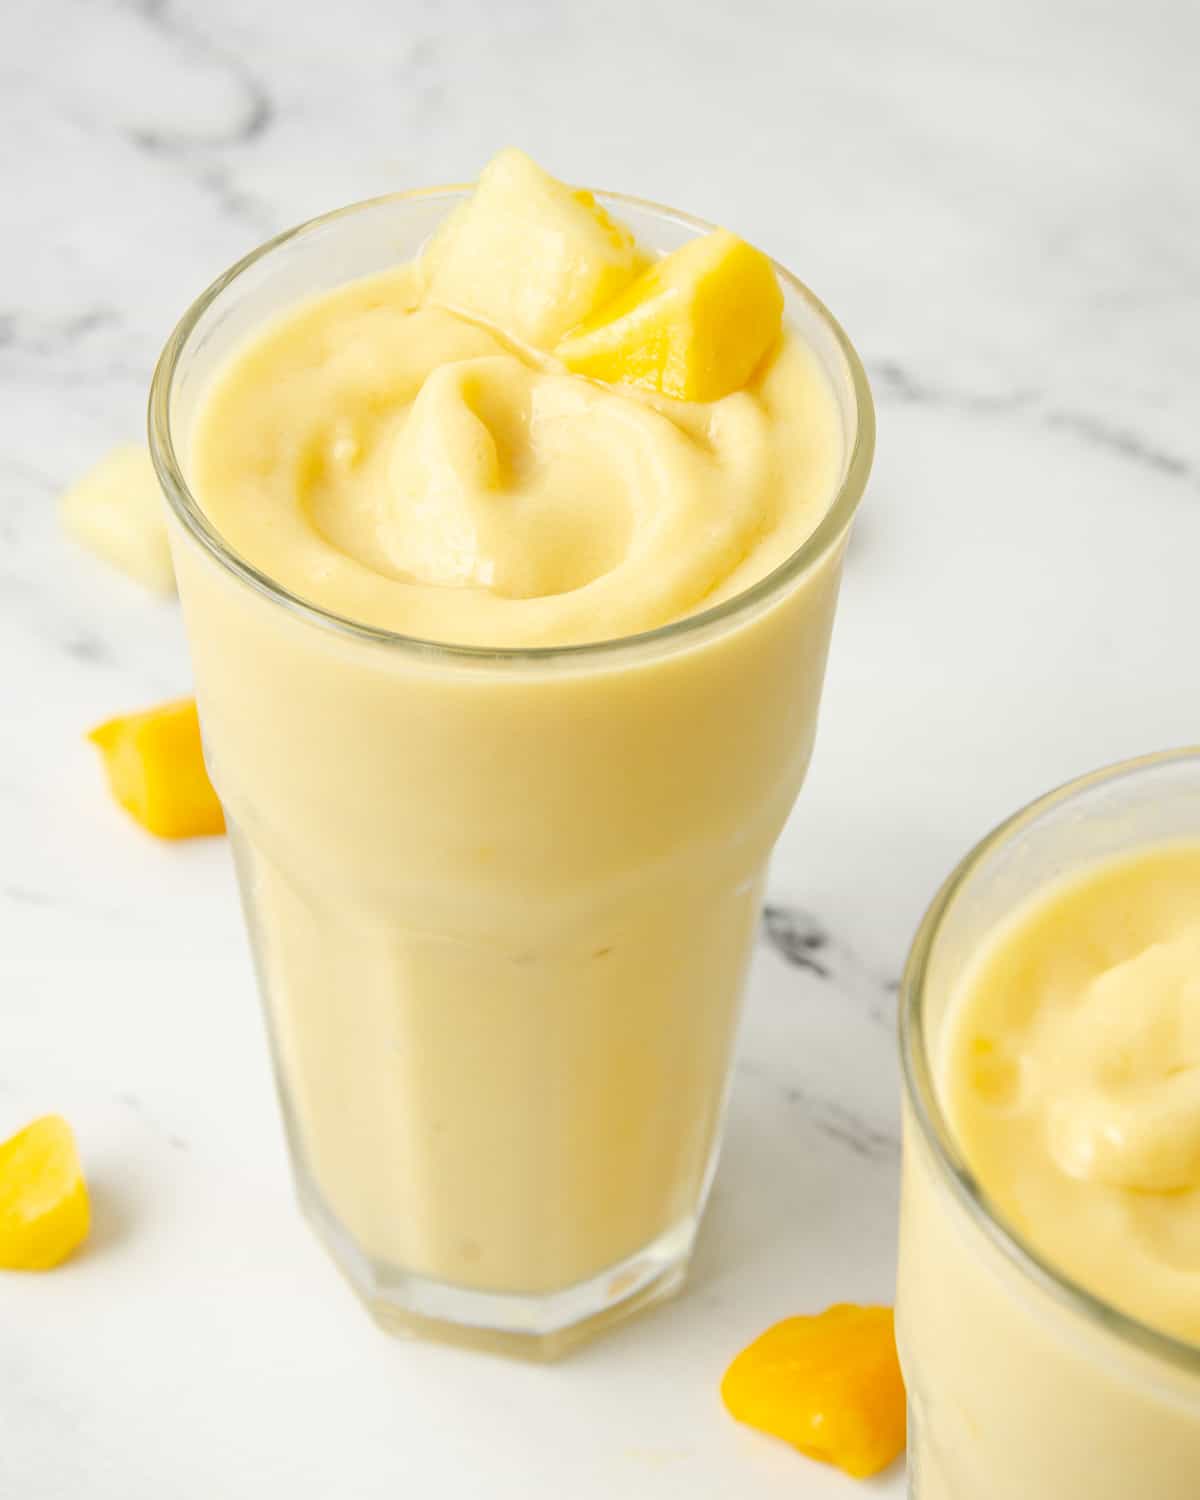 Tall glass filled with a yellow pineapple mango smoothie inside.